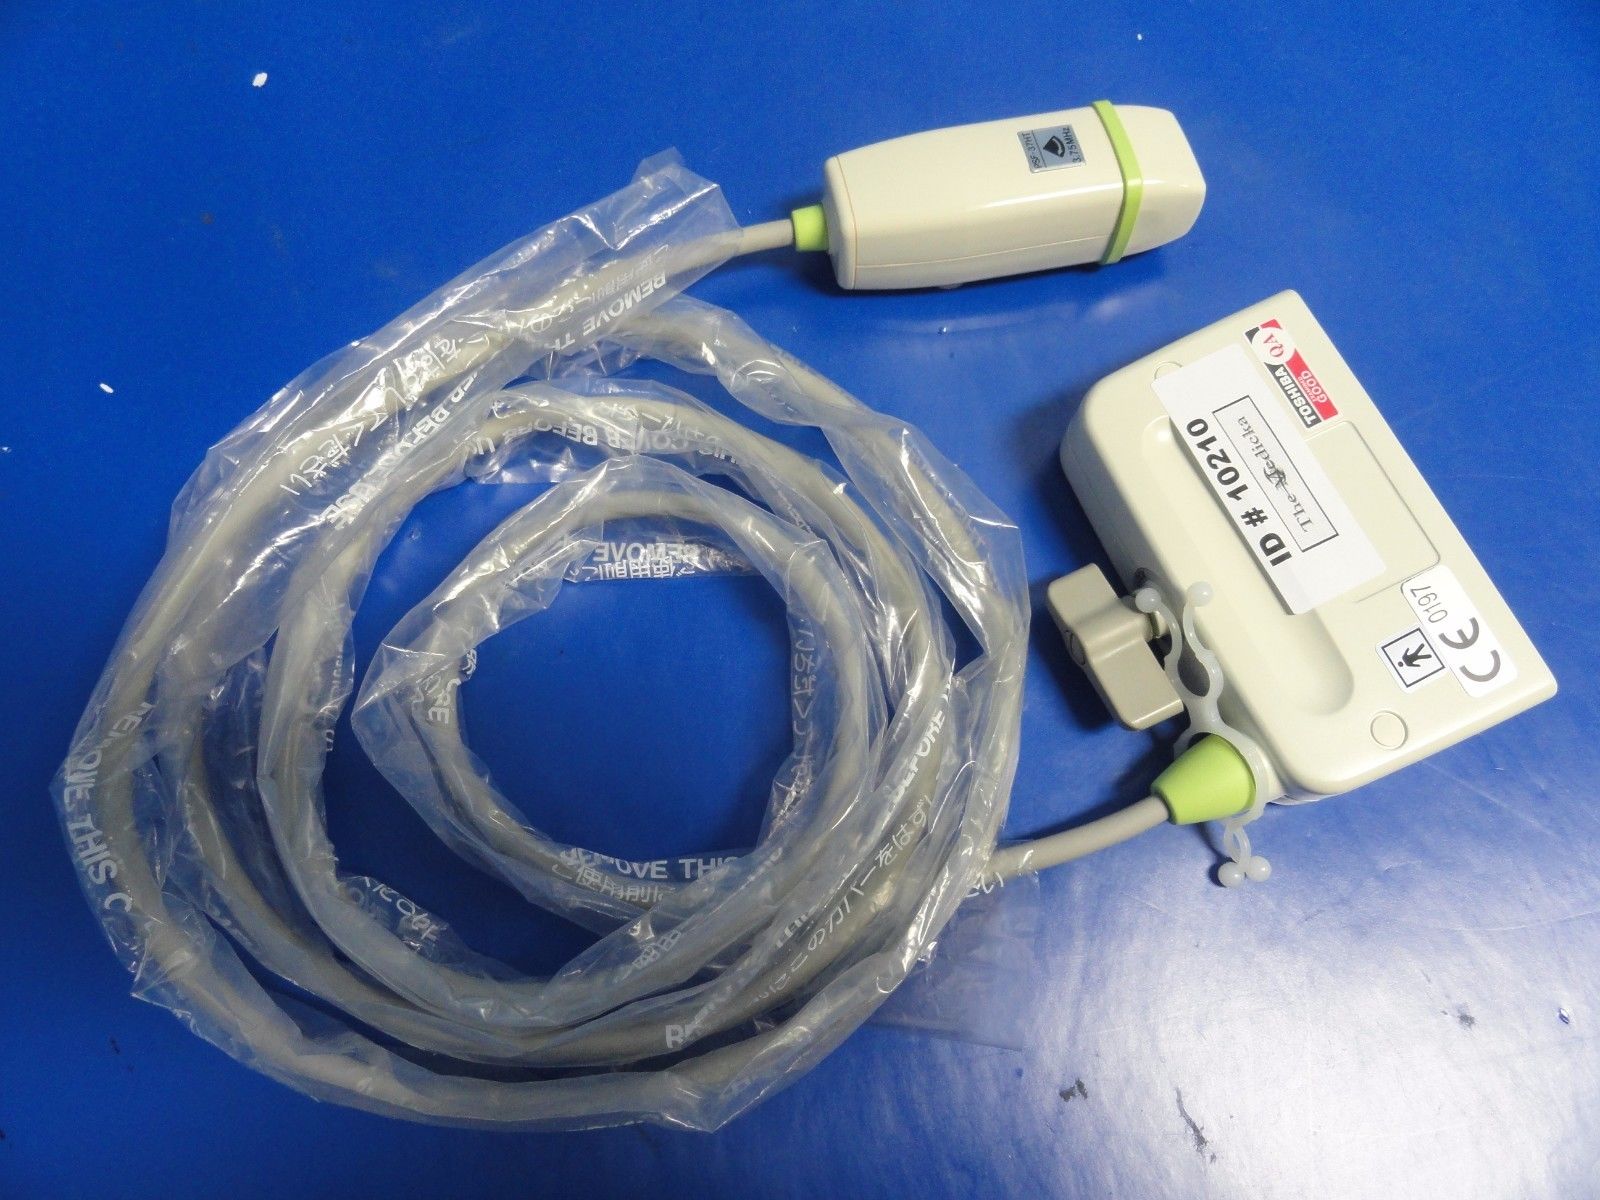 2006 TOSHIBA PSF-37HT 3.75MHz Phased Array Probe for SSH-140A & 340A (10210 ) DIAGNOSTIC ULTRASOUND MACHINES FOR SALE